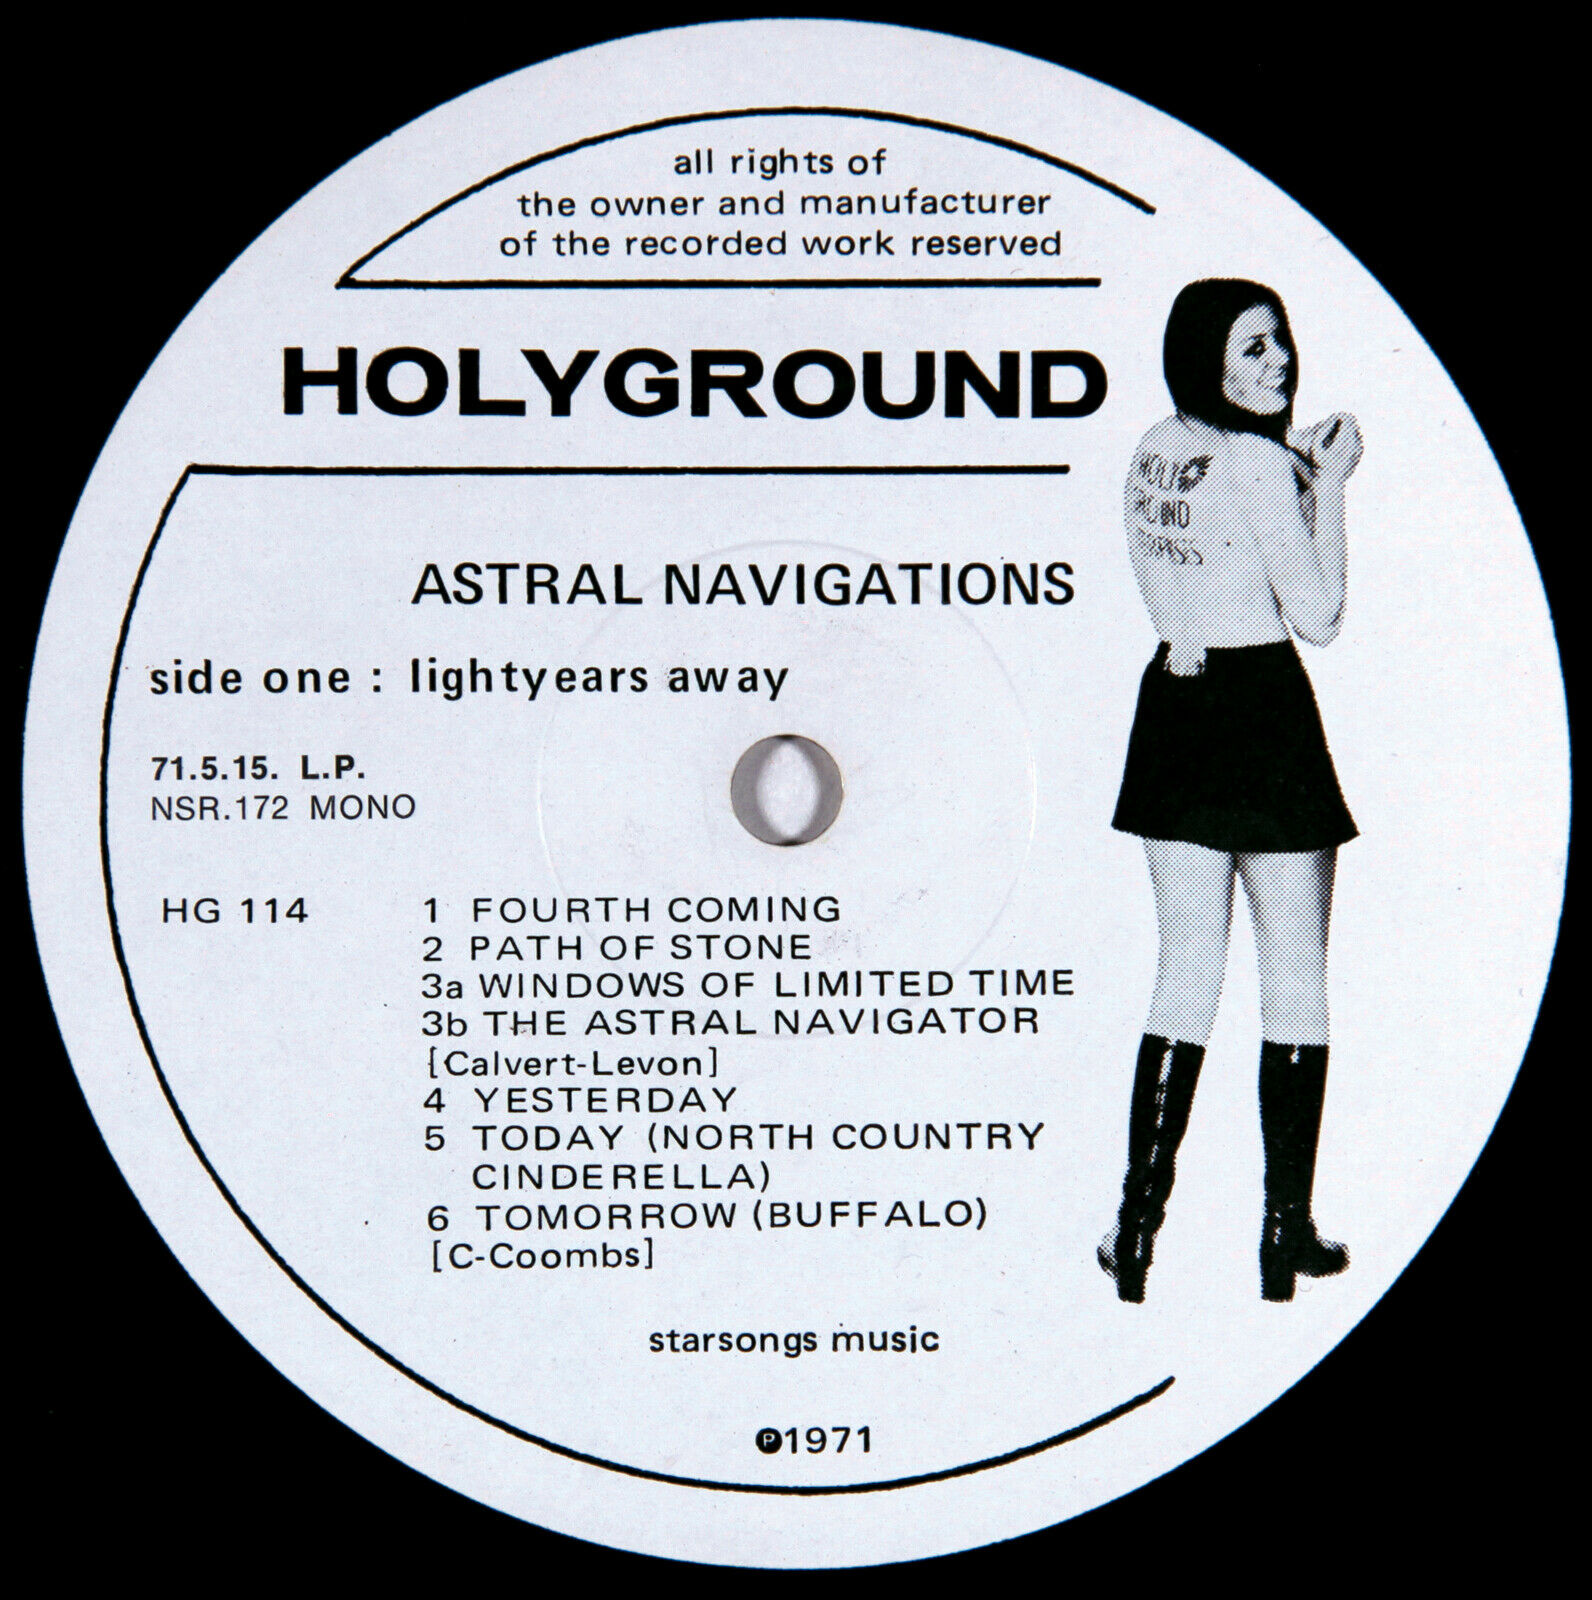 Pic 2 ASTRAL NAVIGATIONS LP on Holyground Rare Original 1971 UK Psych Thundermother M-